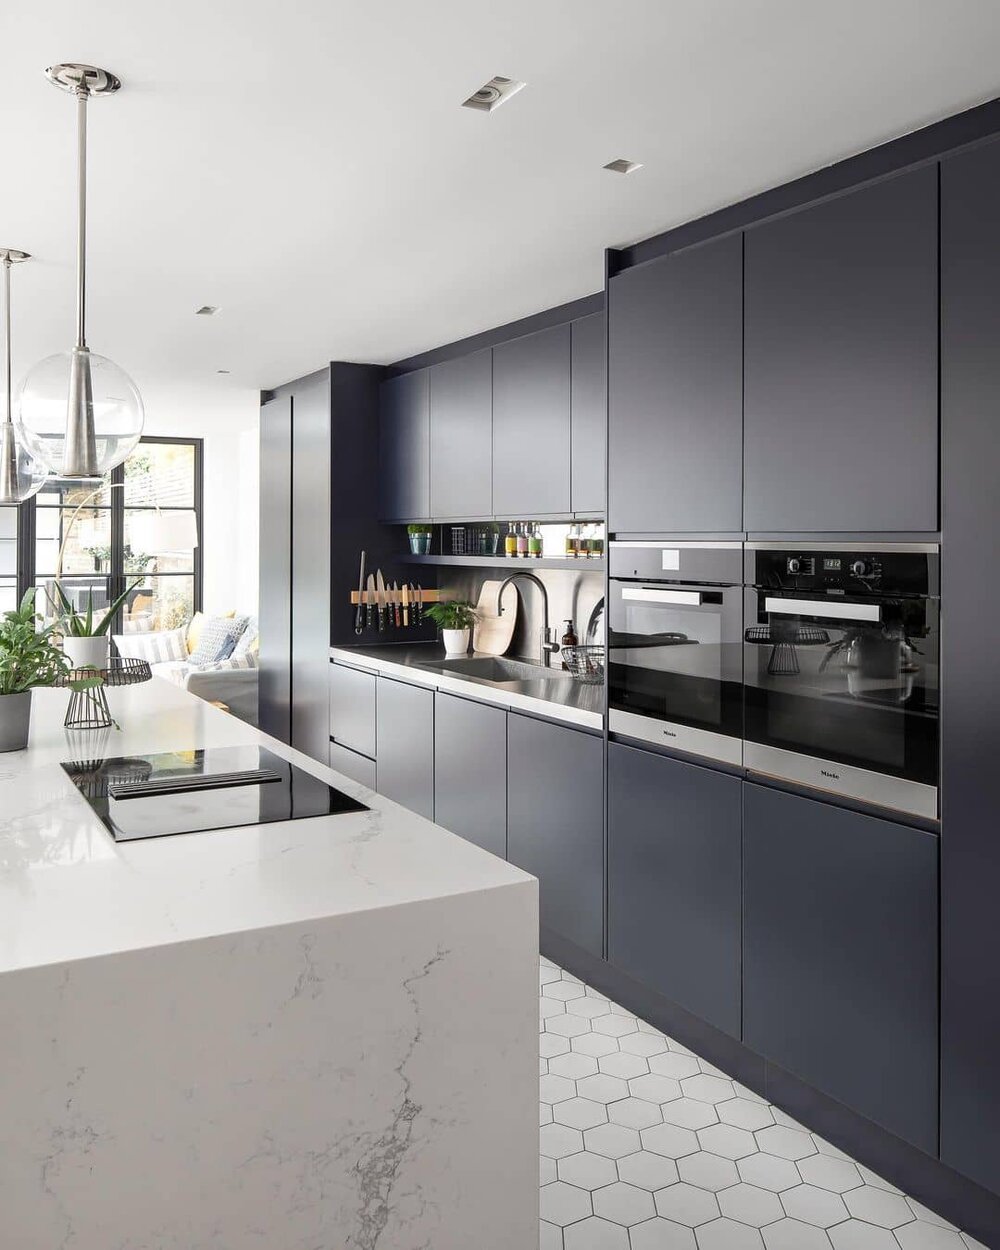 18 modern kitchen ideas for your UK home   Fifi McGee